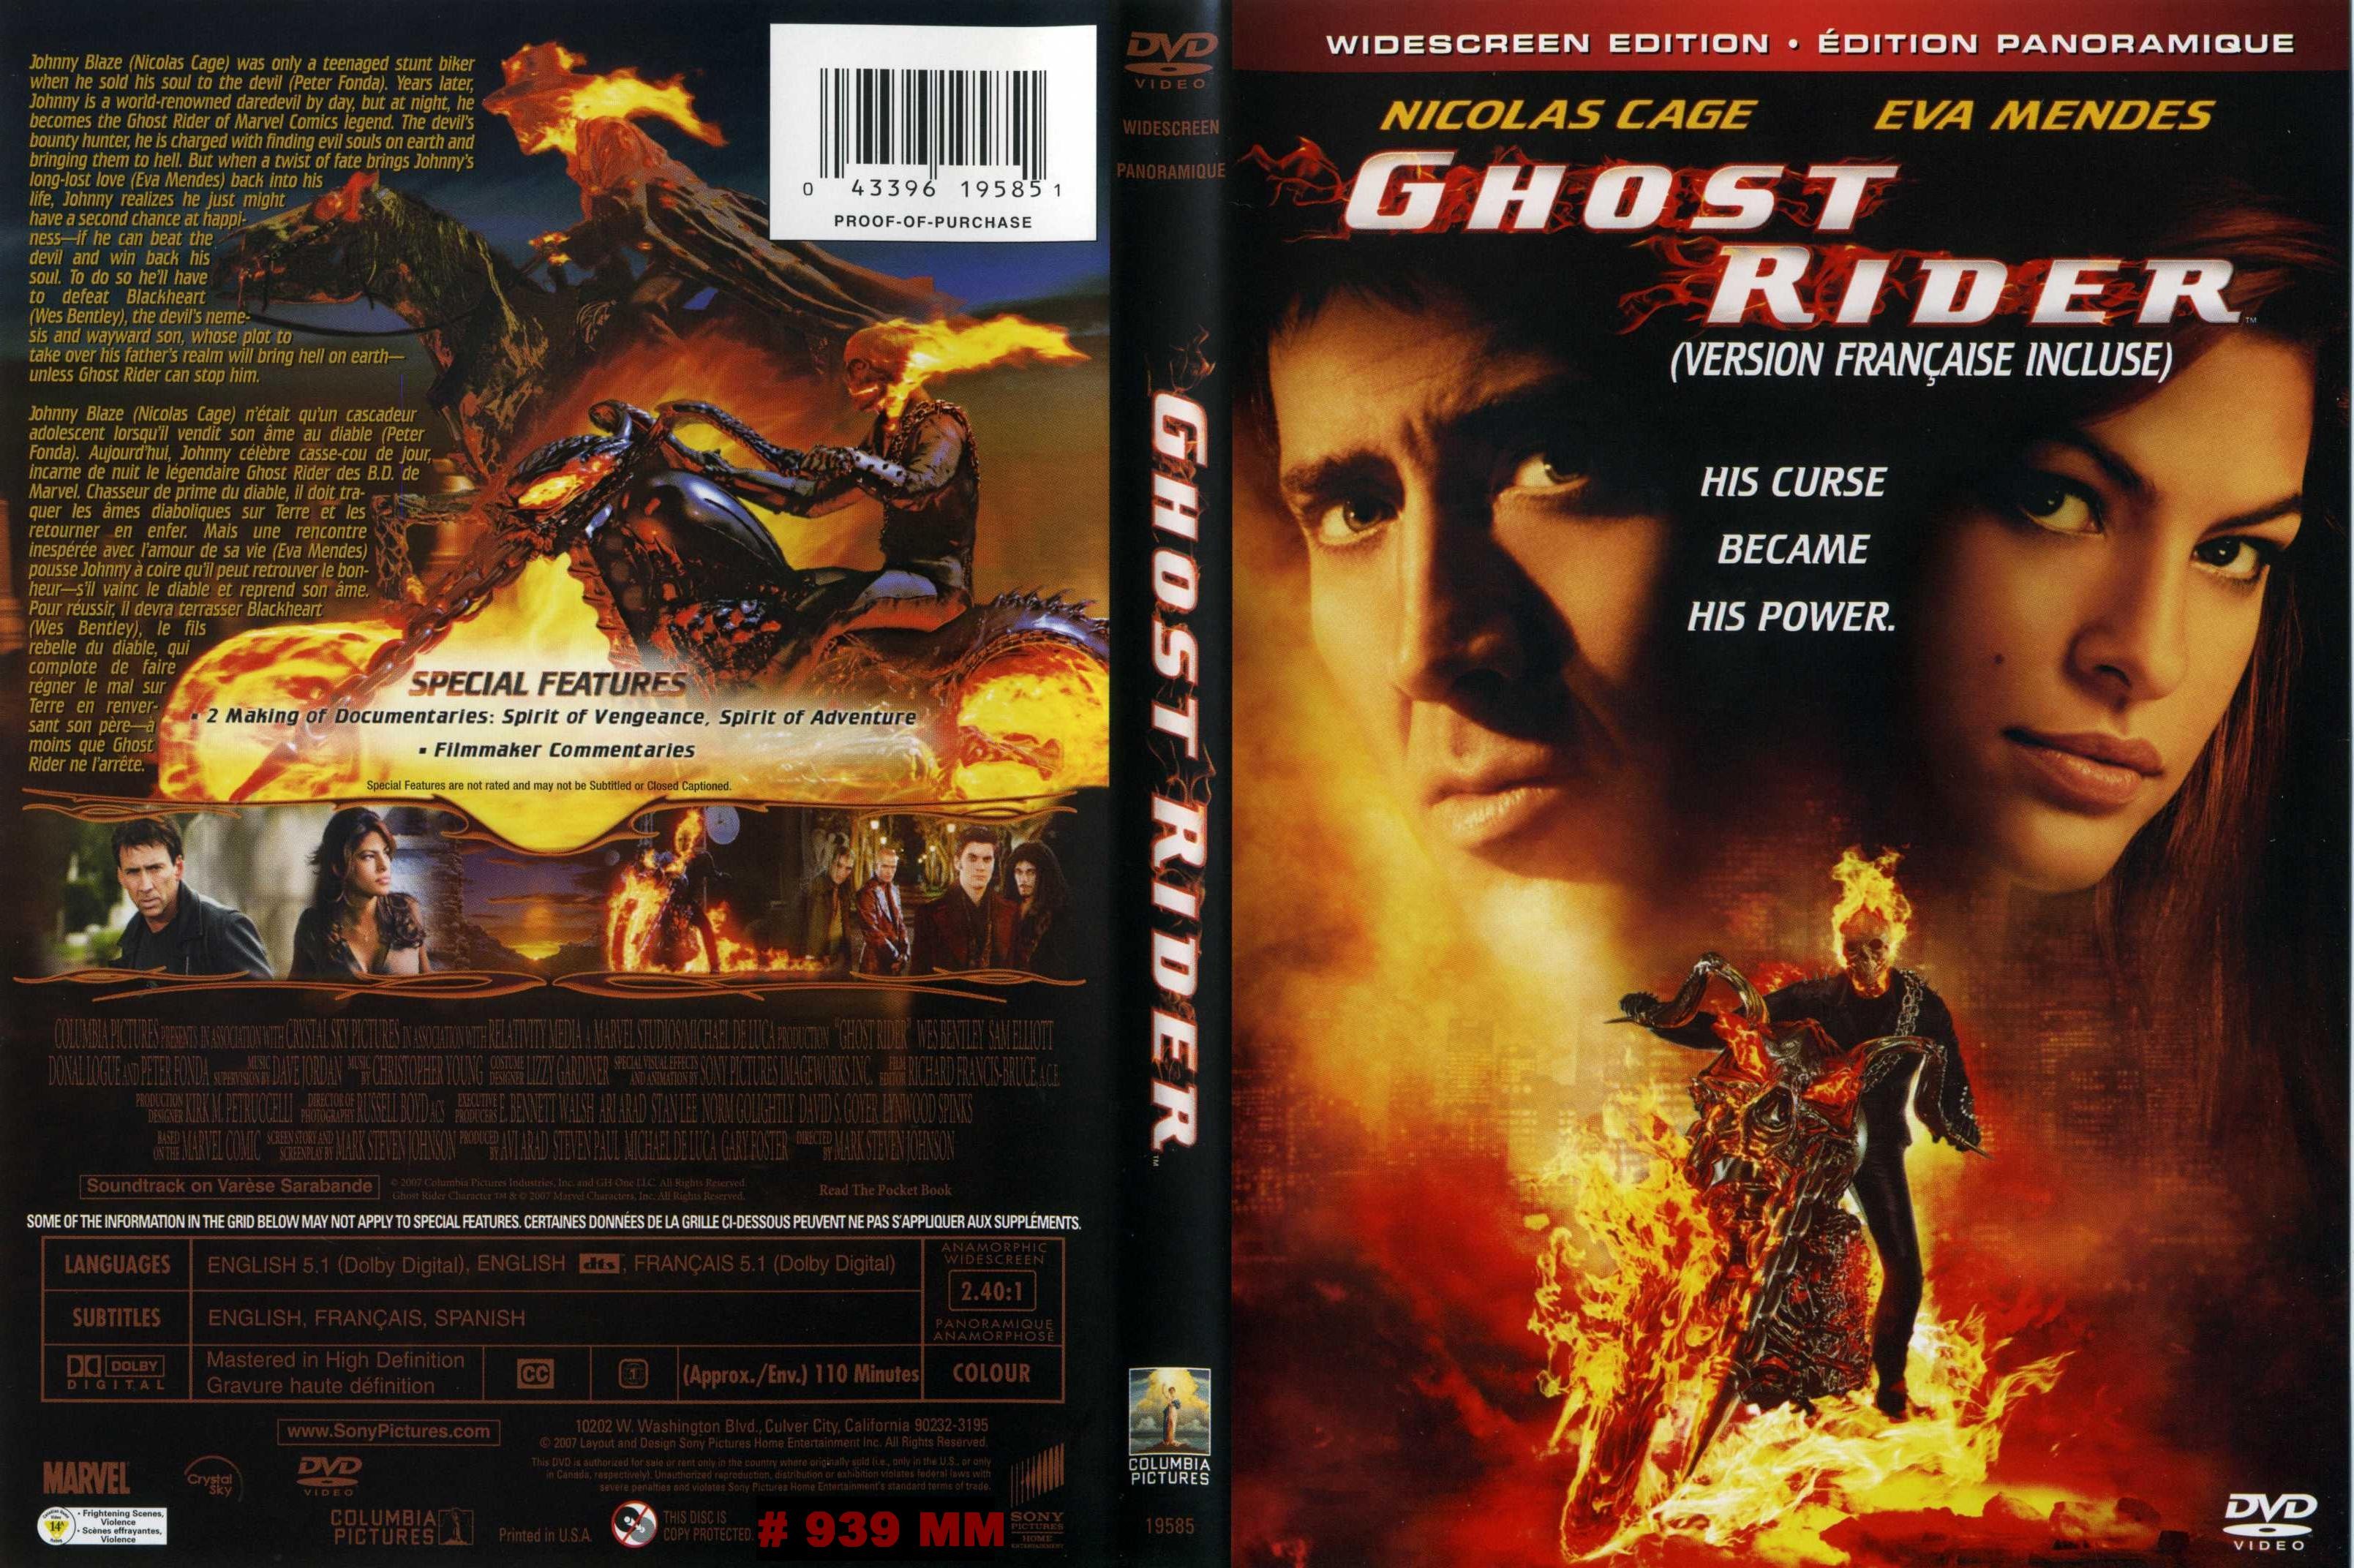 Jaquette DVD Ghost rider Zone 1